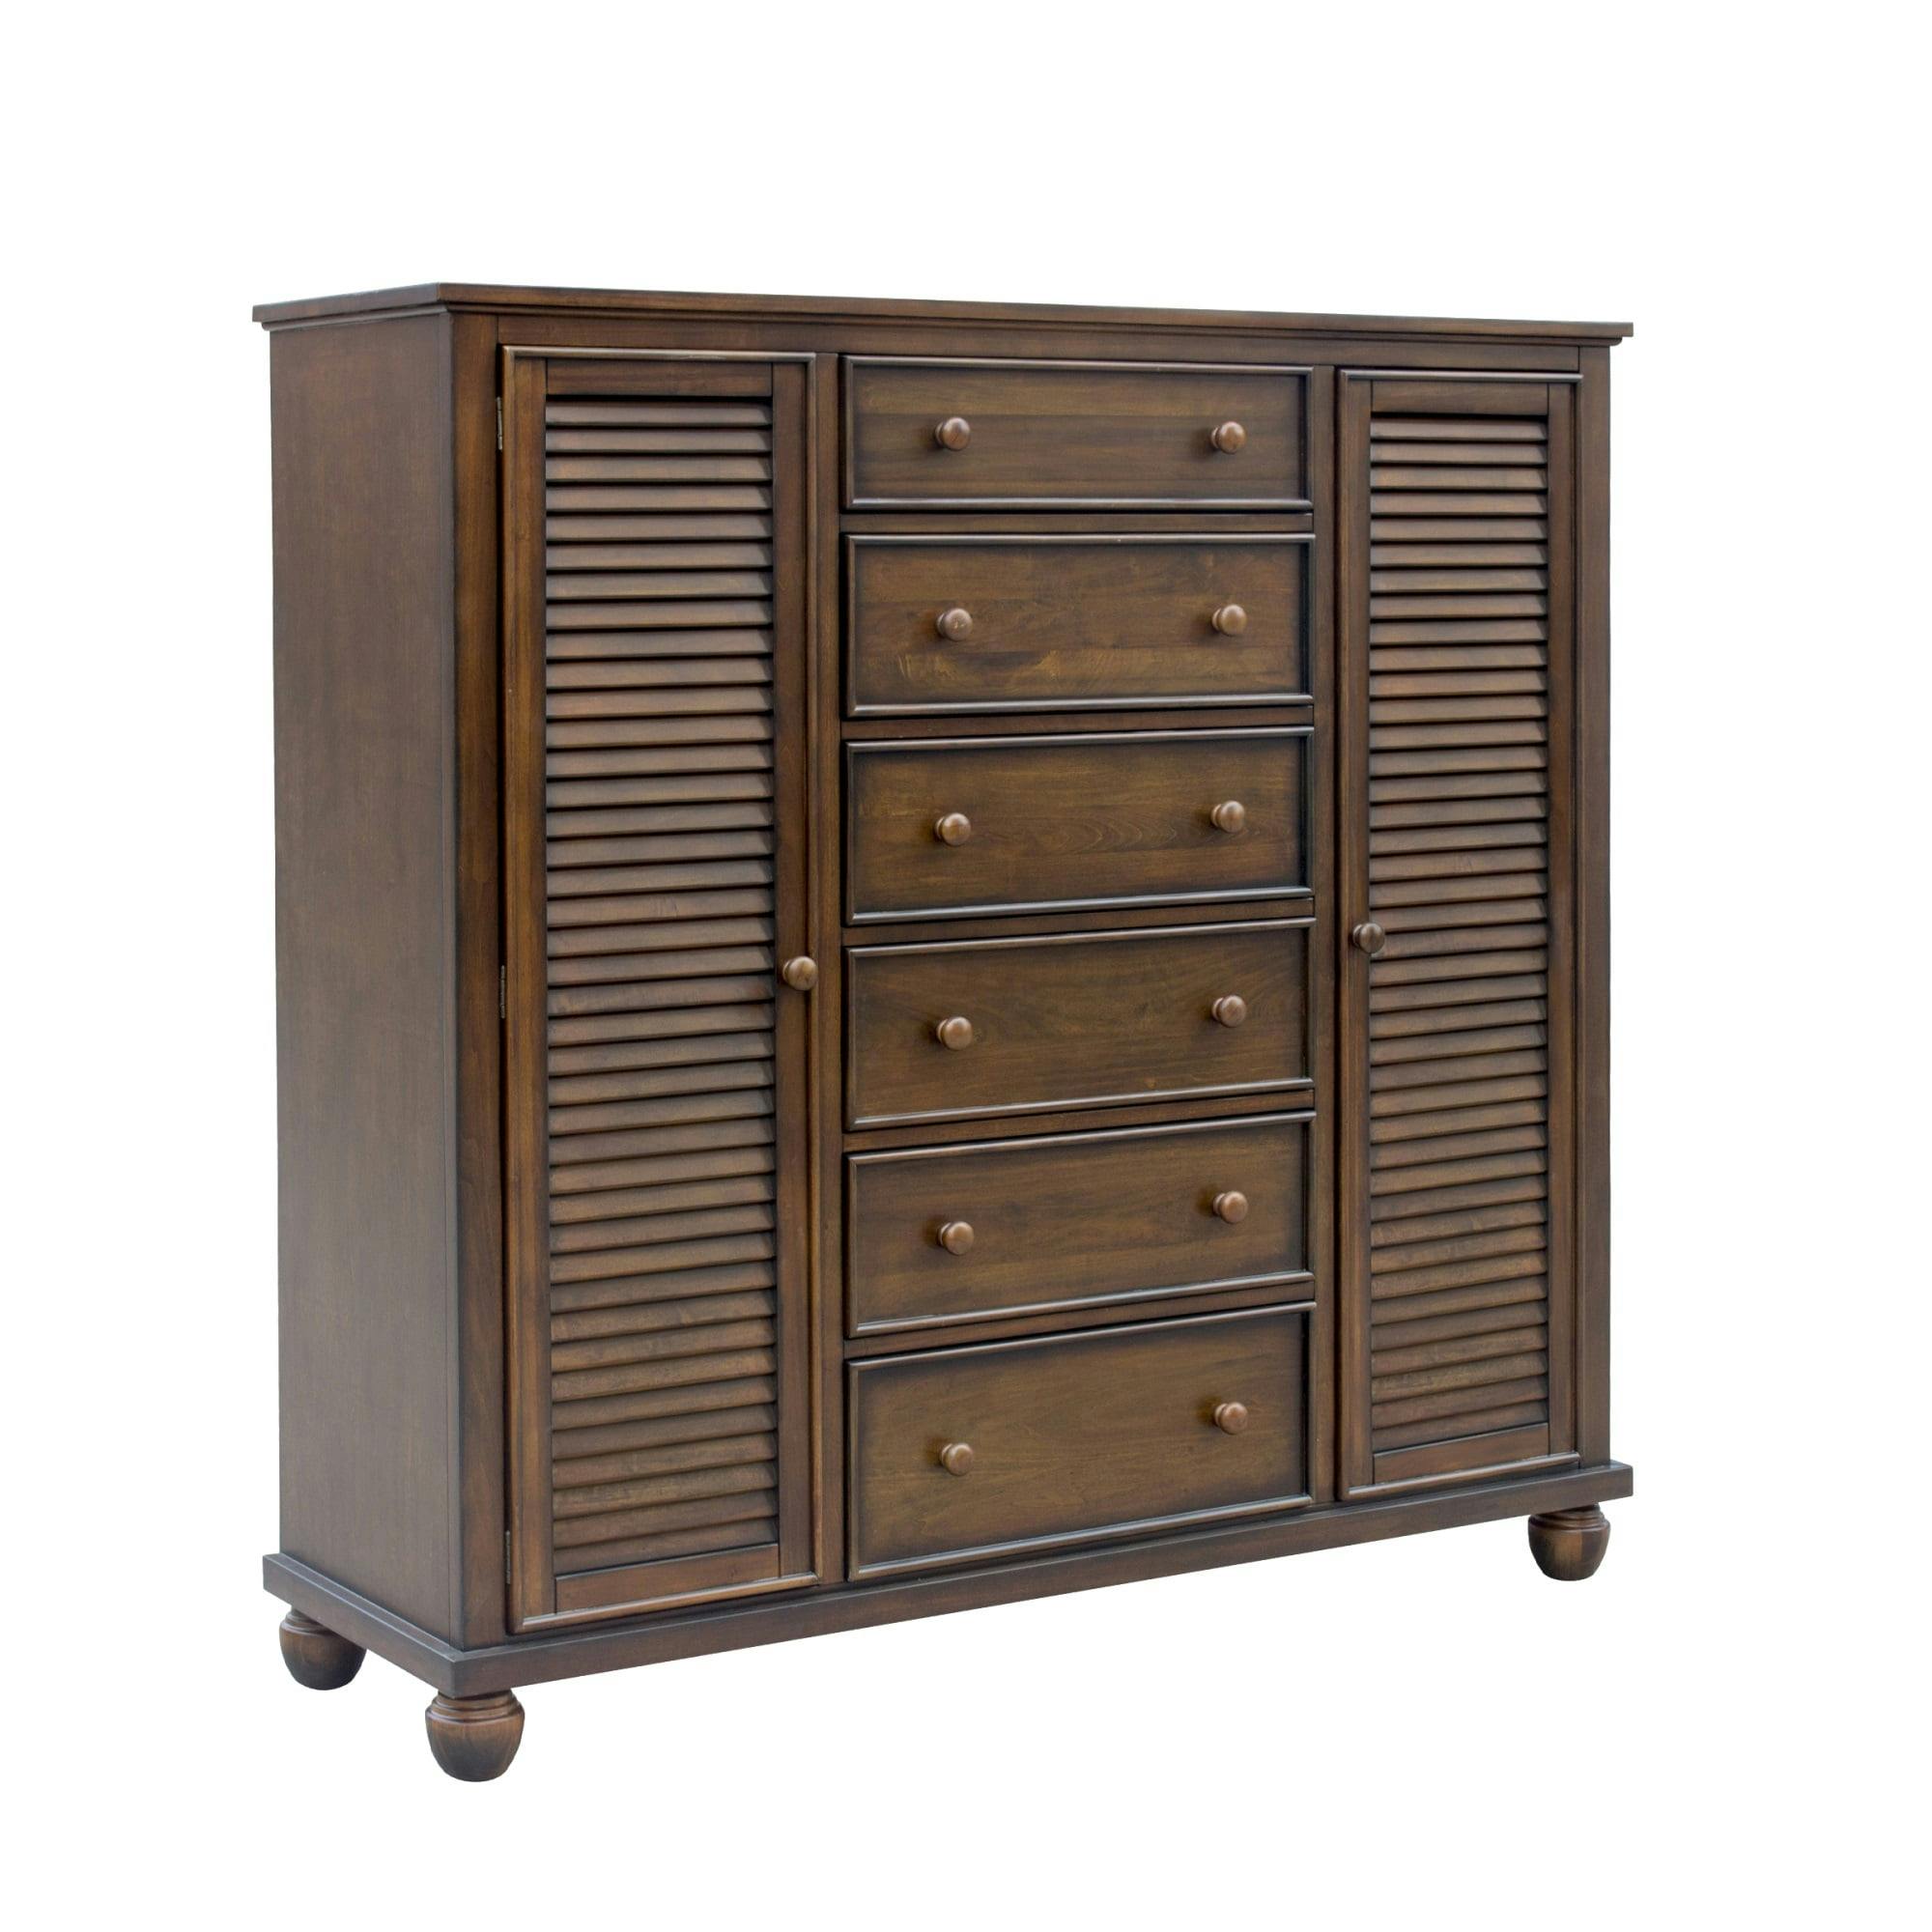 Tropical Walnut Bahama Shutter Wood Armoire with Louvered Doors